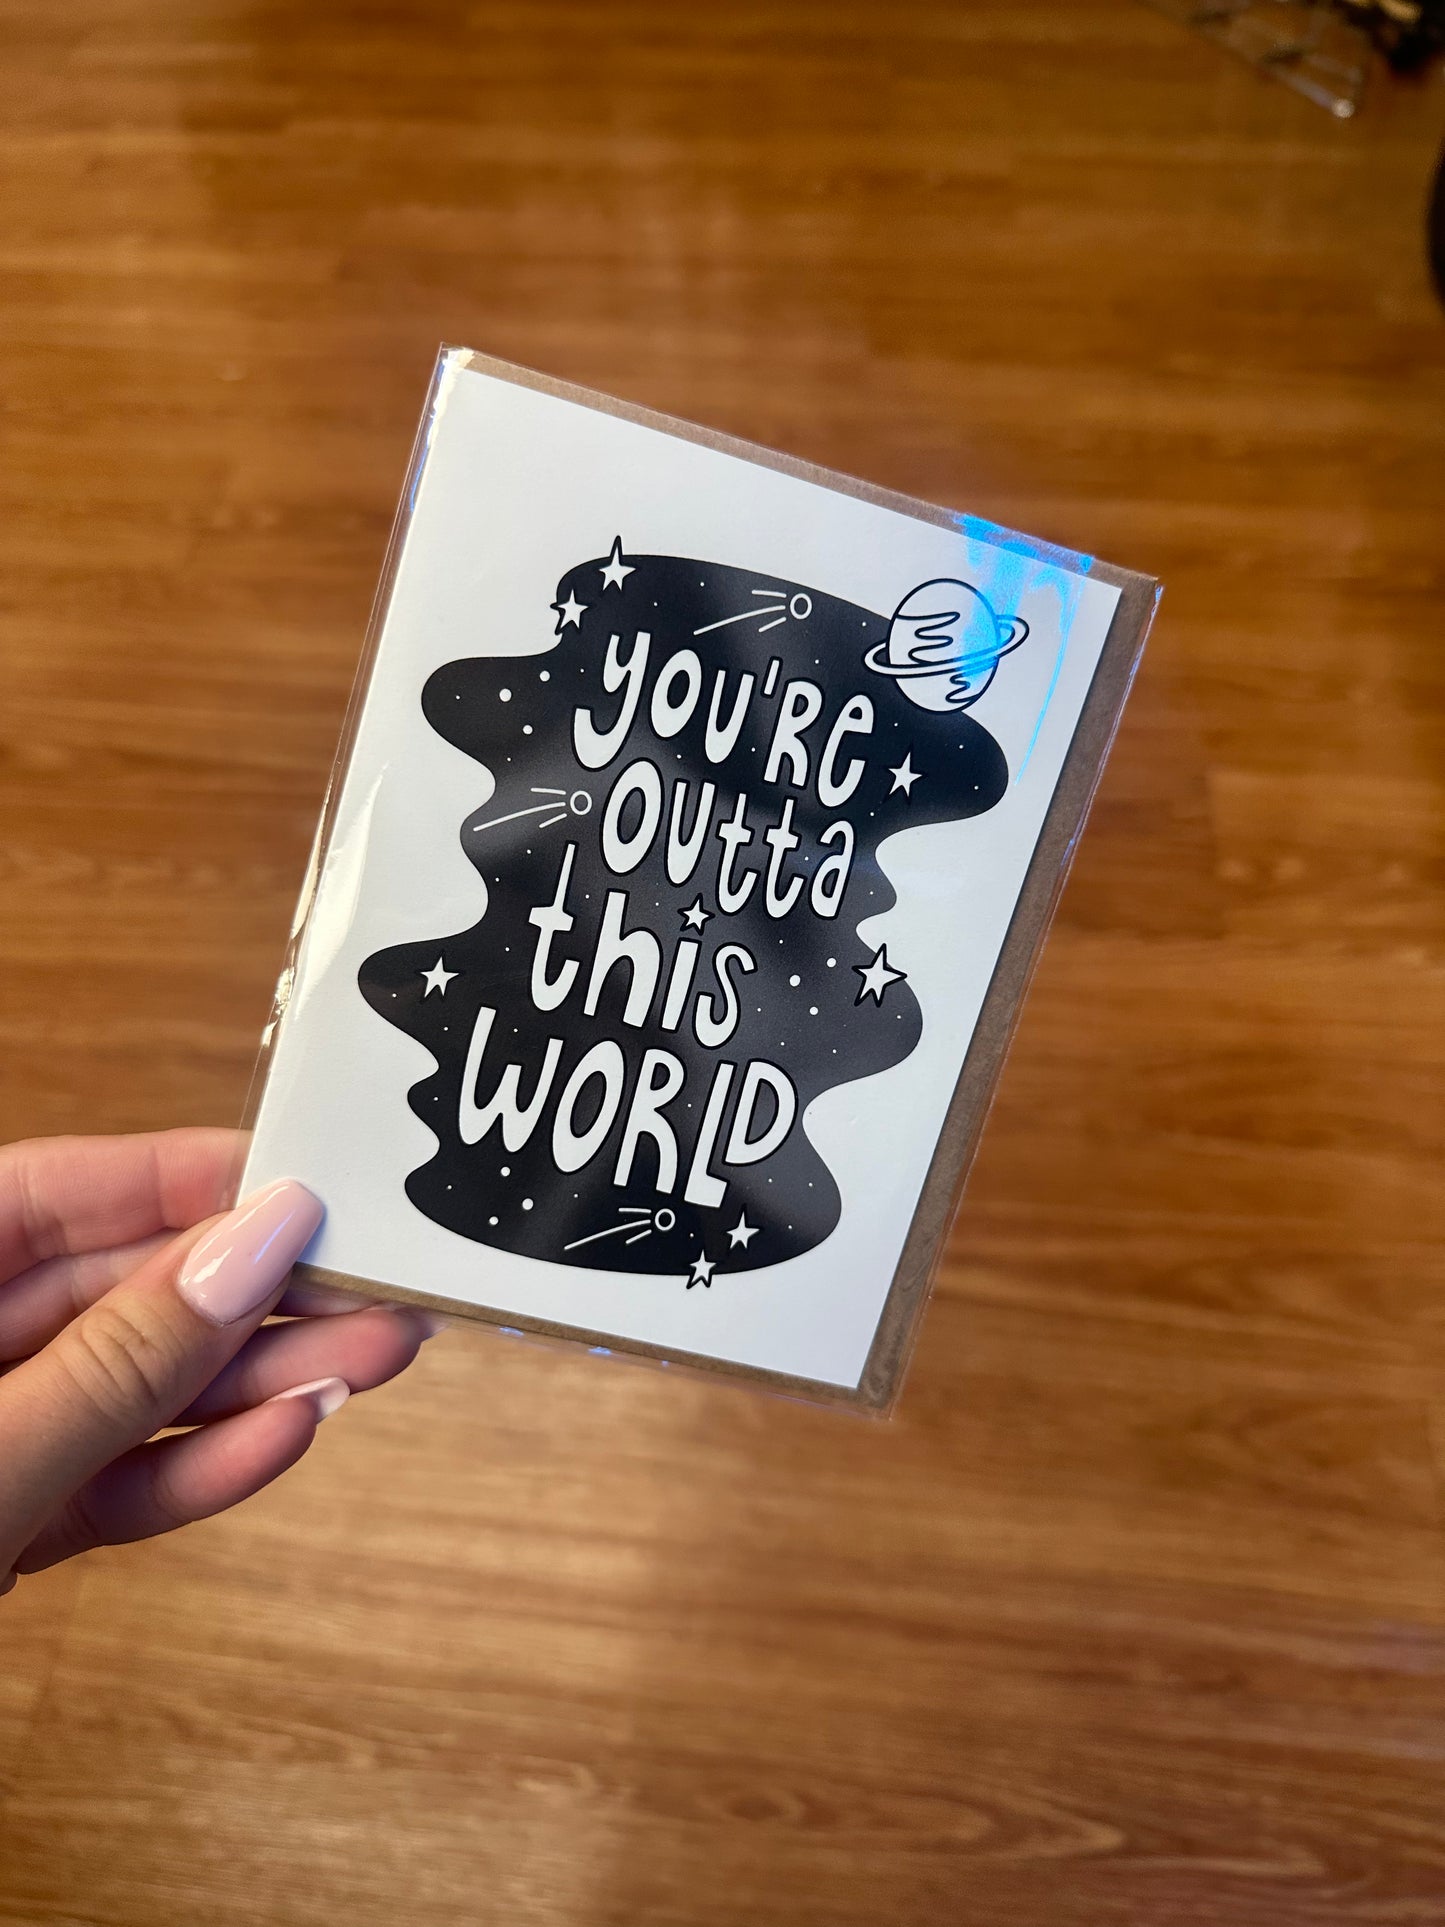 You're Outta This World Card